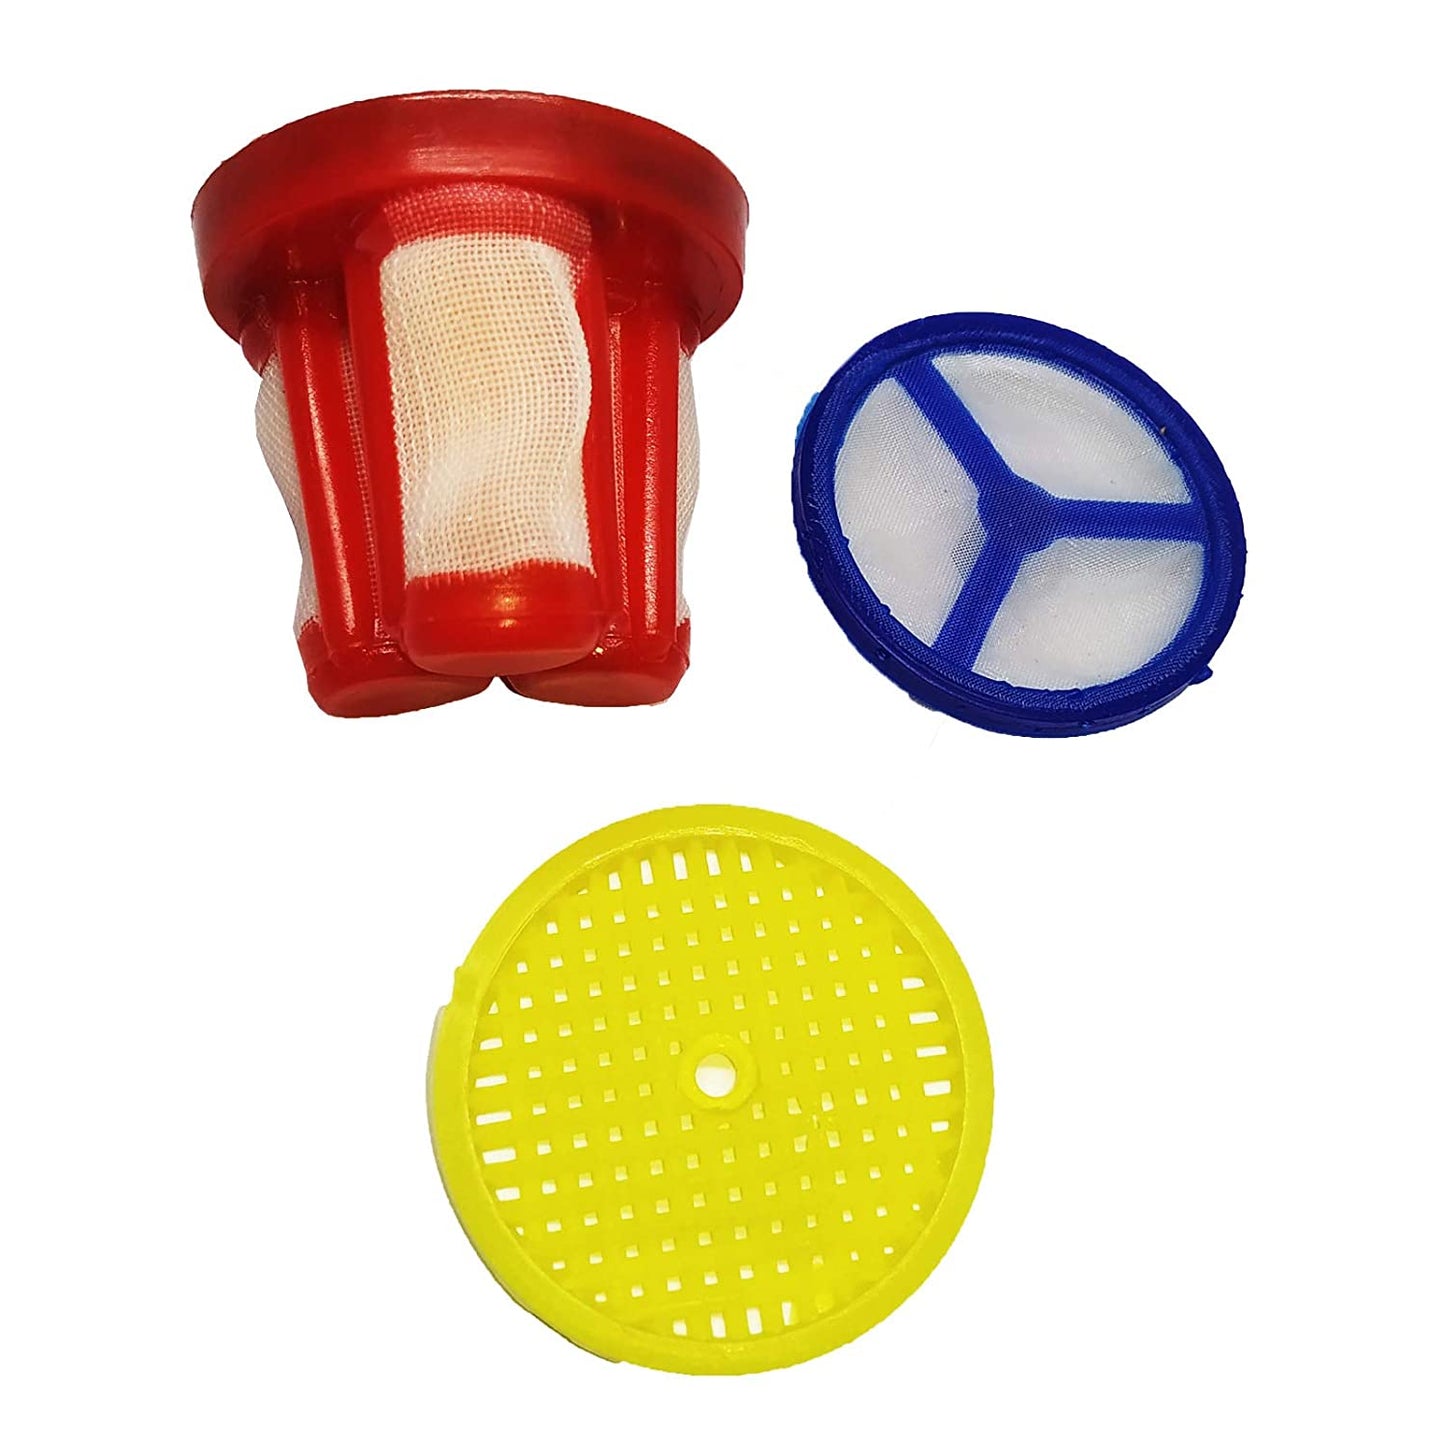 Water Tap Plastic Candle Filter Cartridge